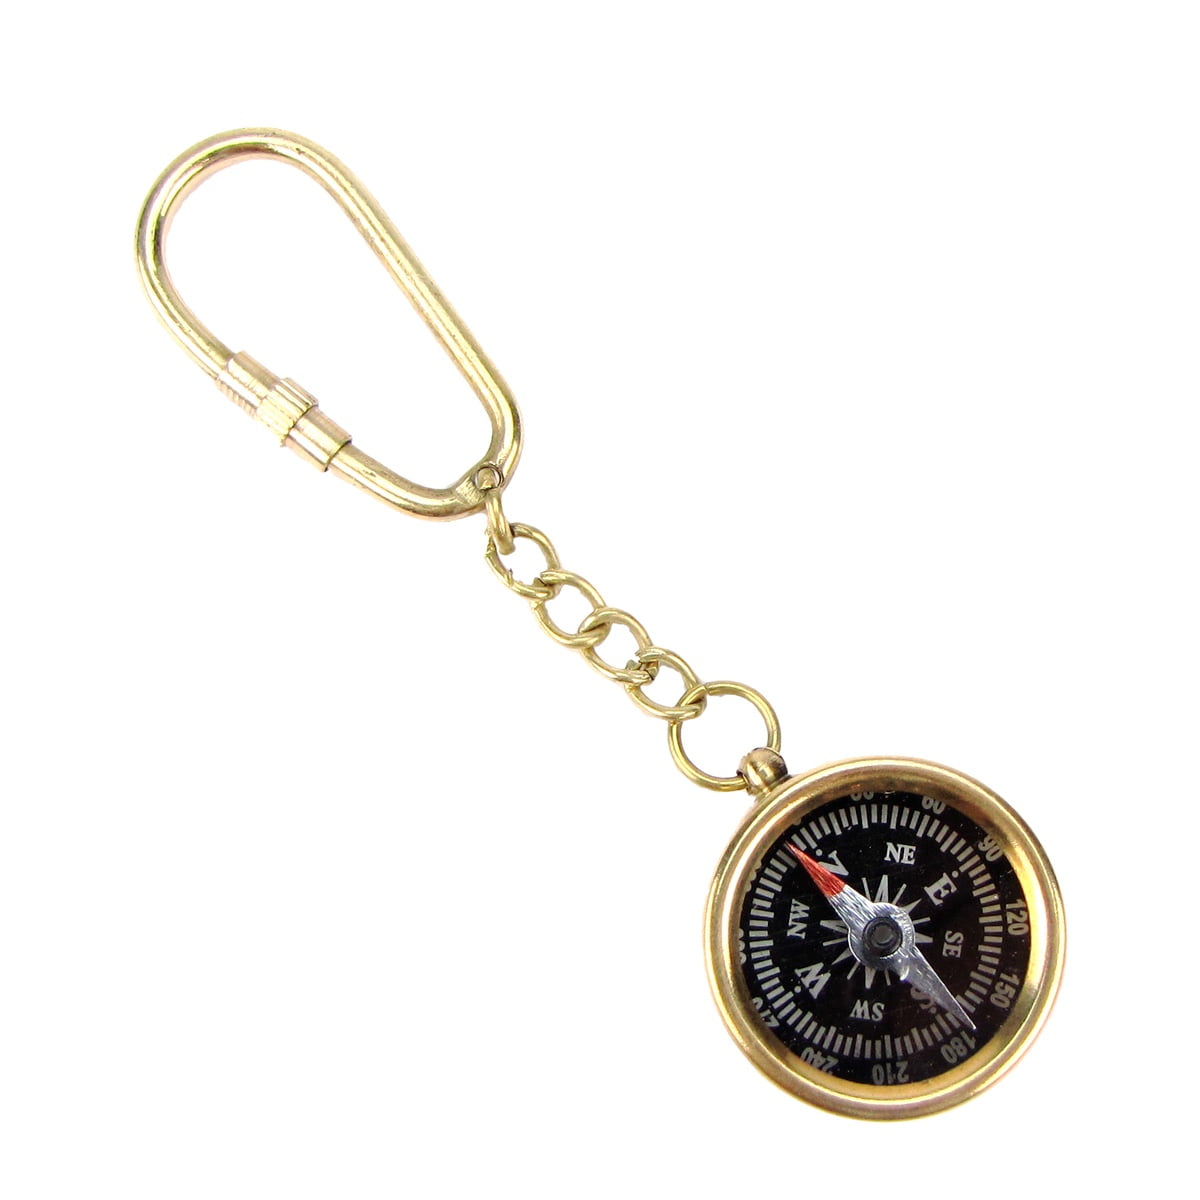 DYNWAVE Pocket Aluminum Gold Army Compass Outdoor Camping Hiking Keychain 